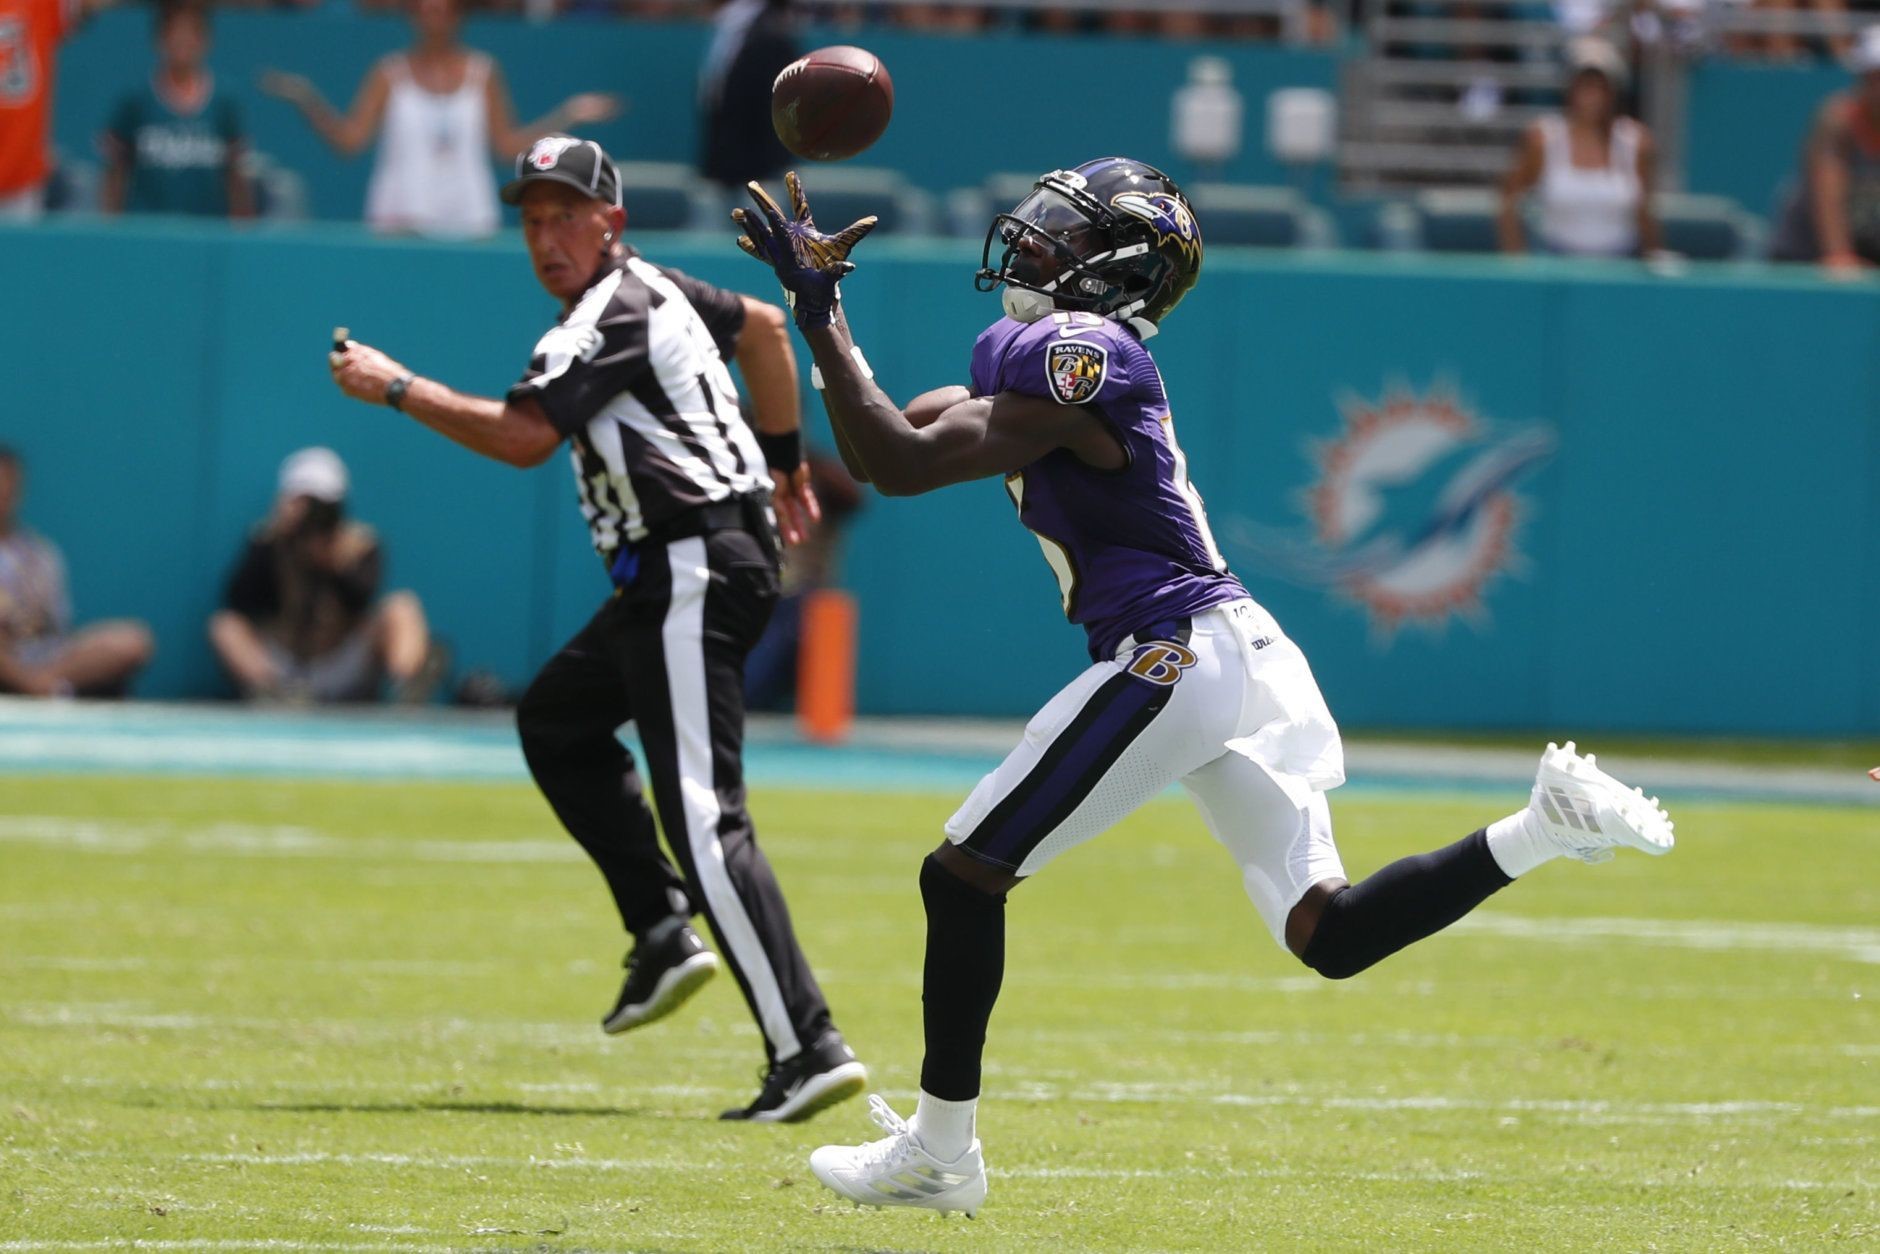 Ravens wide receiver Marquise Brown grabs a pass for a touchdown.